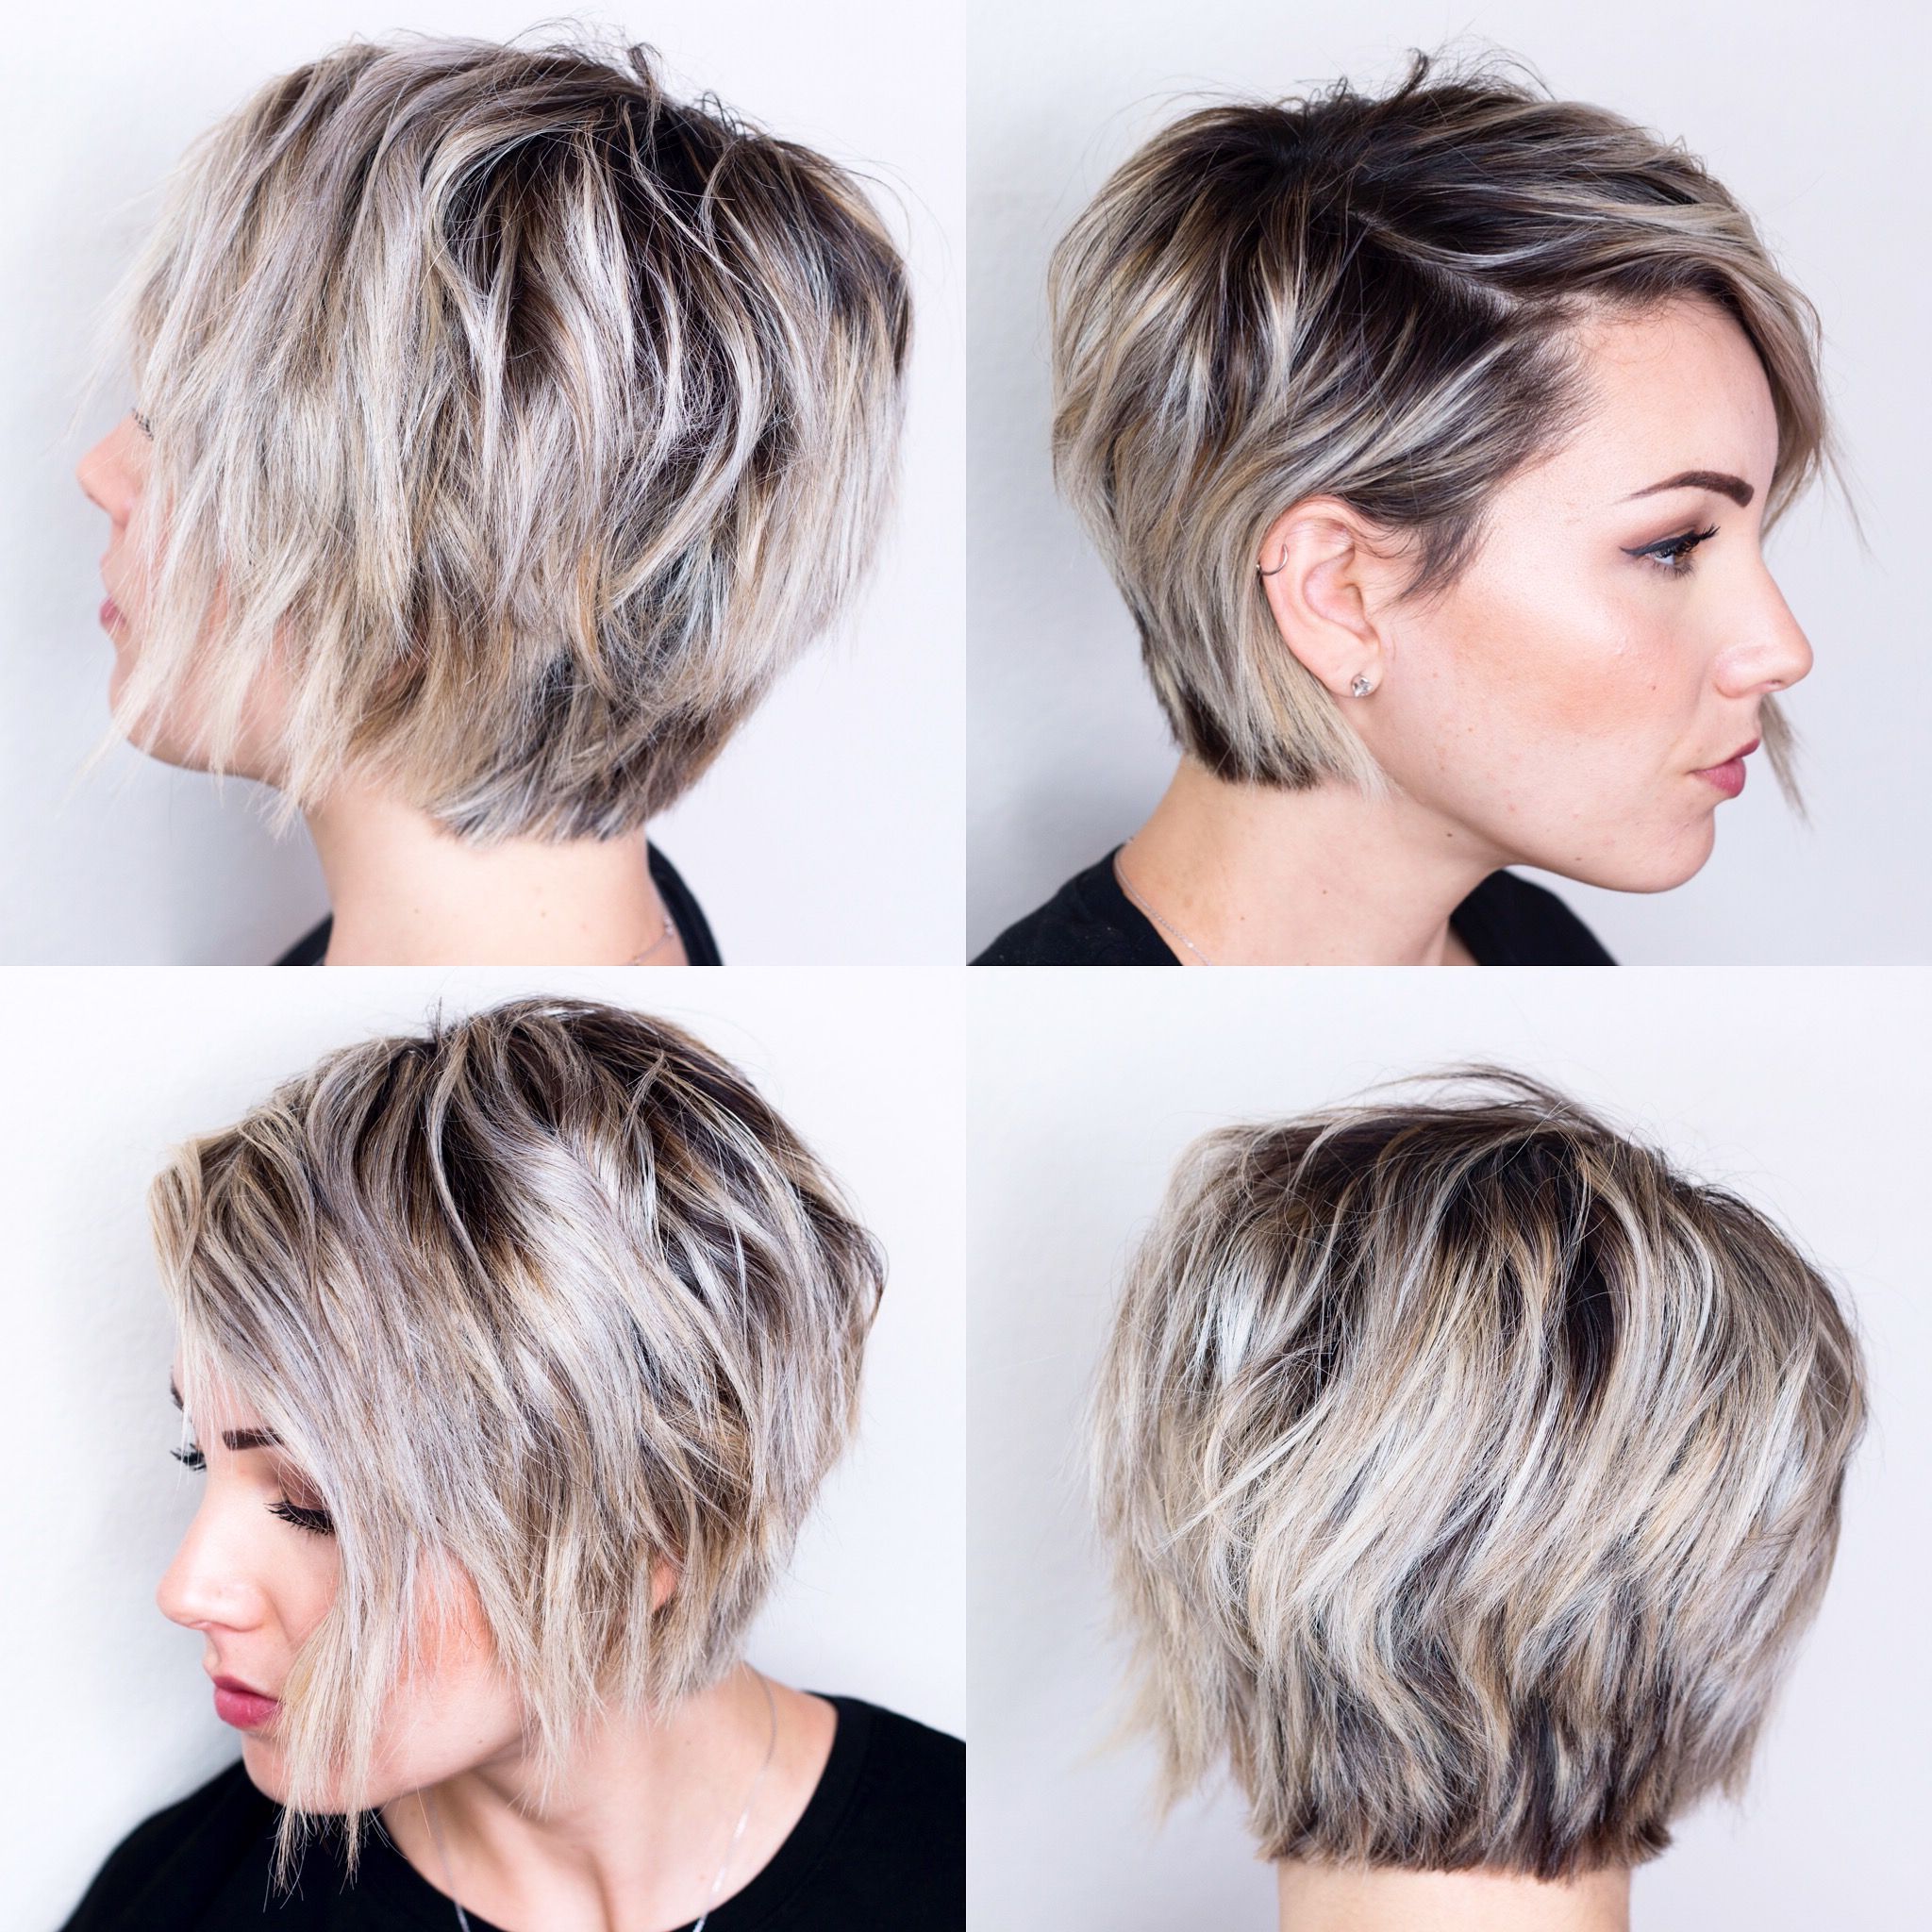 360 View Of Short Hair | H A I R In 2018 | Pinterest | Short Hair Throughout Short Haircuts For Women With Oval Face (Photo 2 of 25)